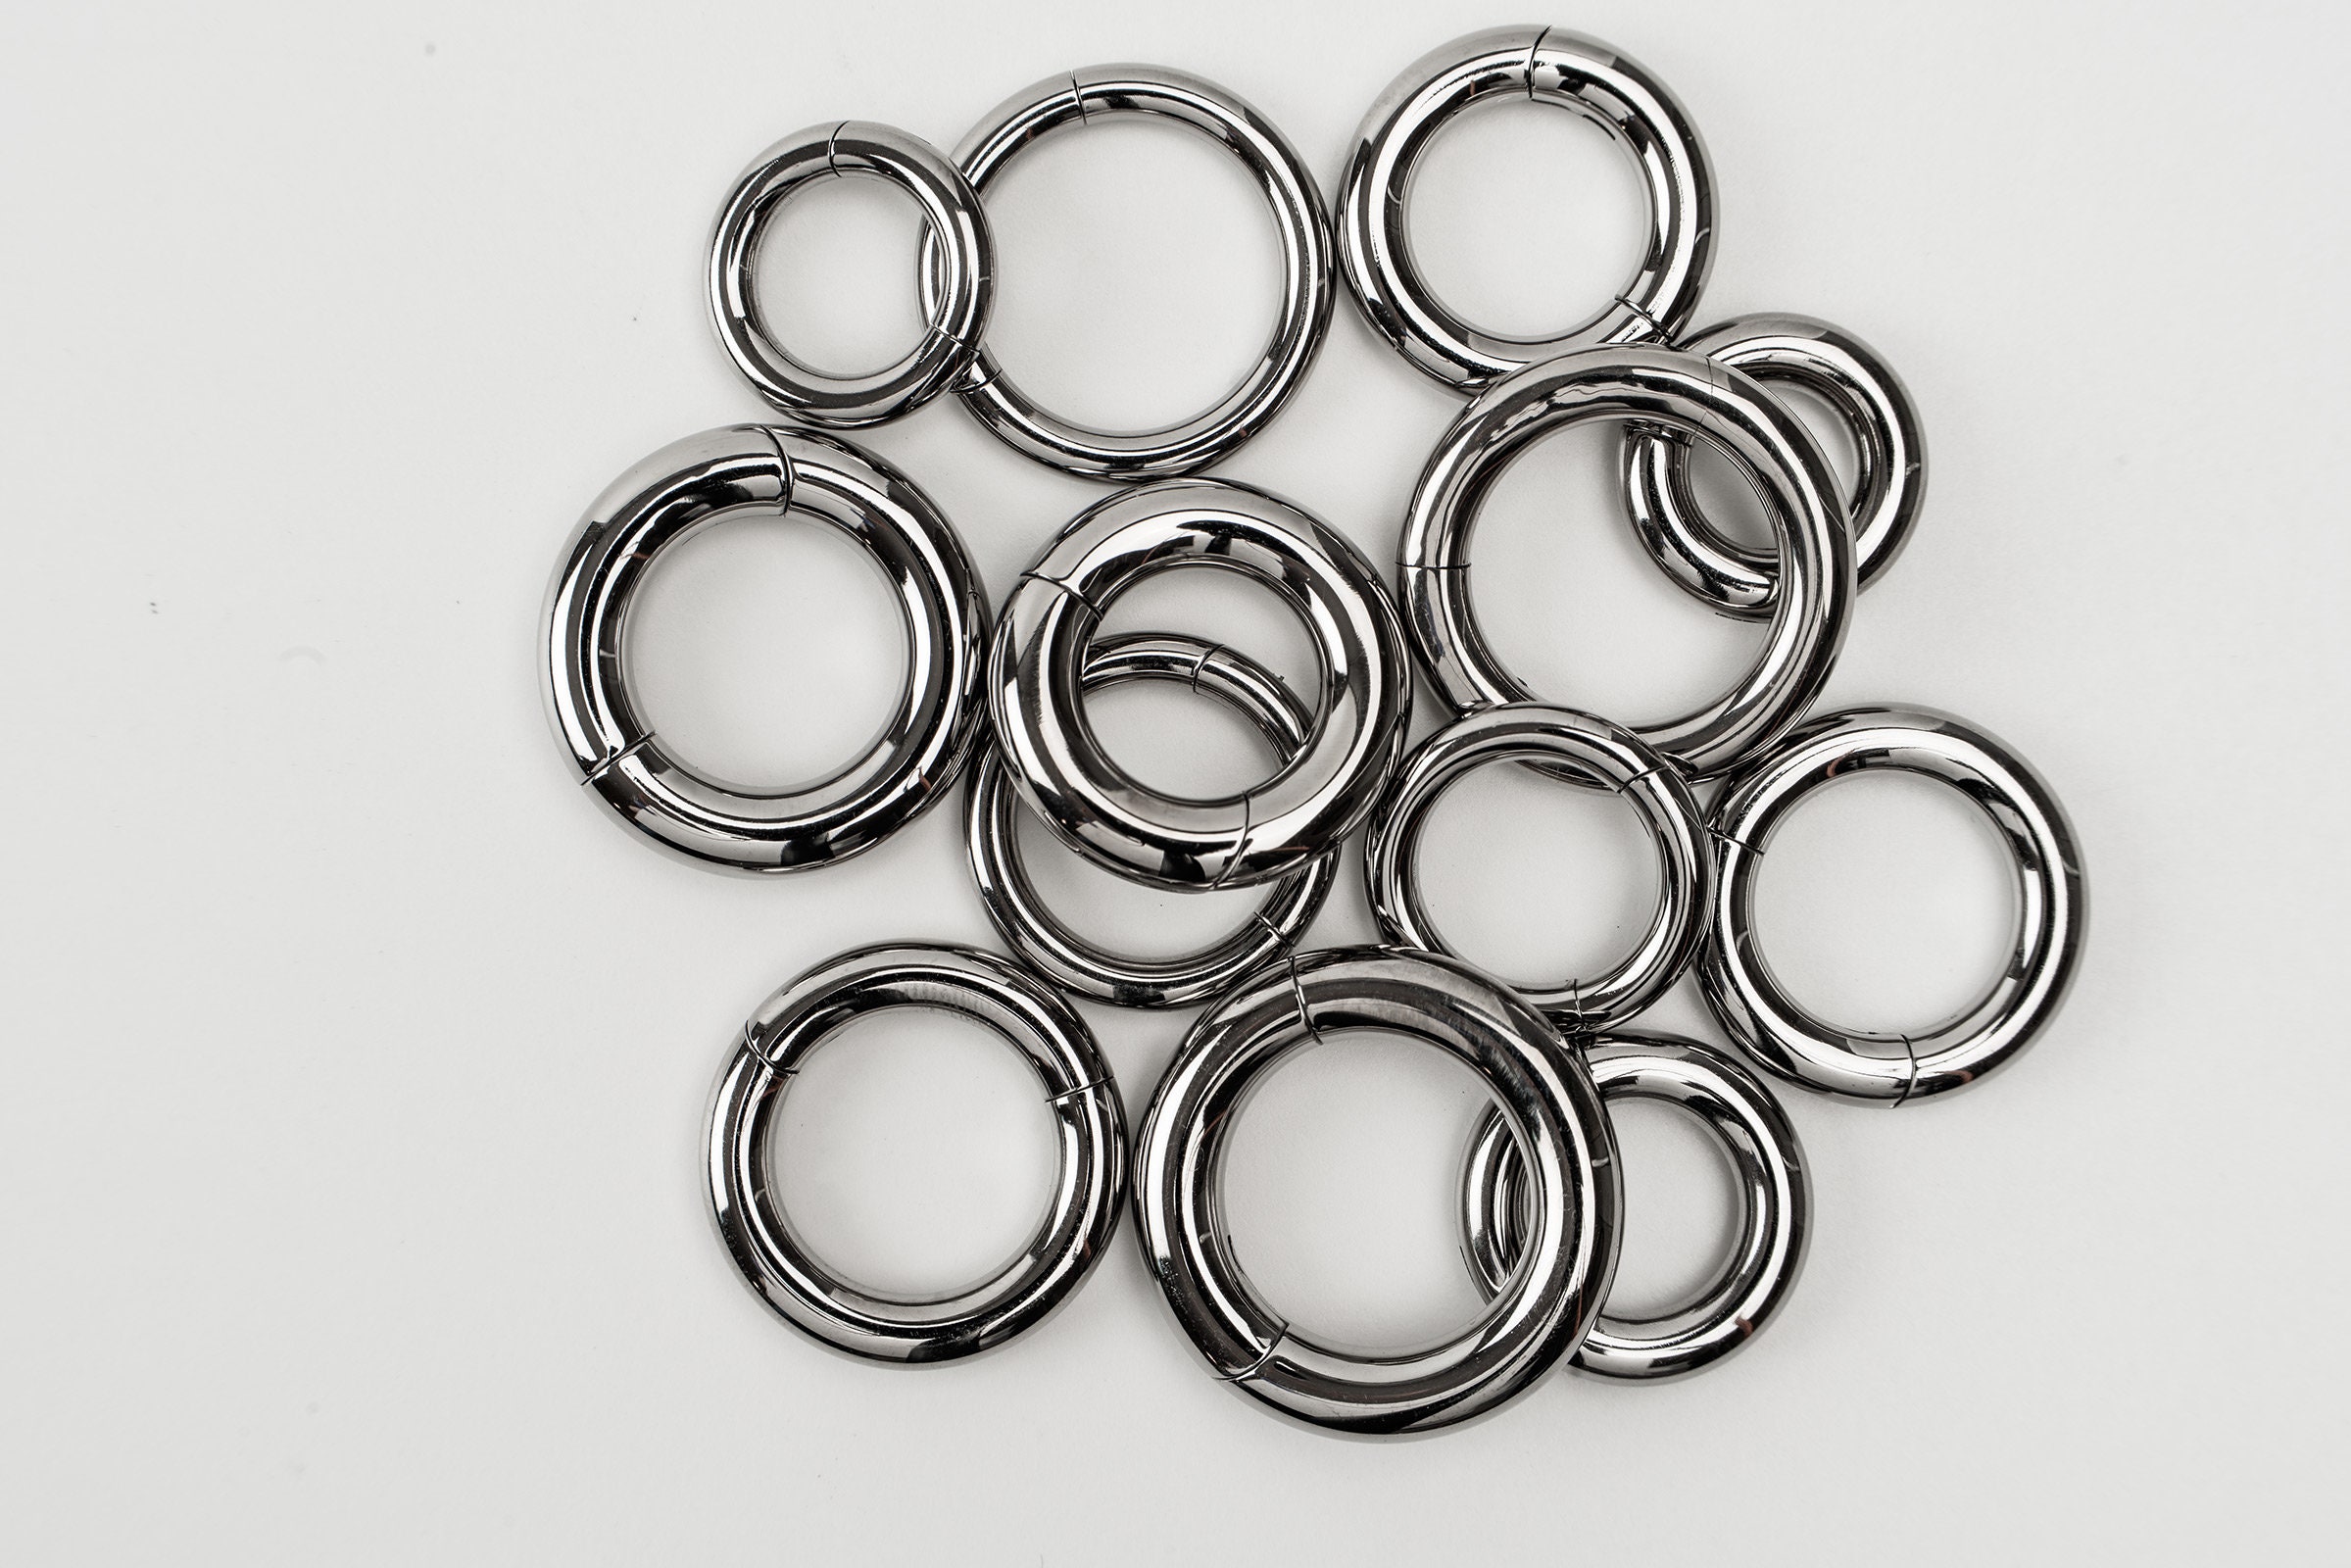 6g Stainless Screw-Ball Ring | Tulsa Body Jewelry 6g (4mm) - 7/8 Dia (22mm) - 8mm Ball / Stainless Steel